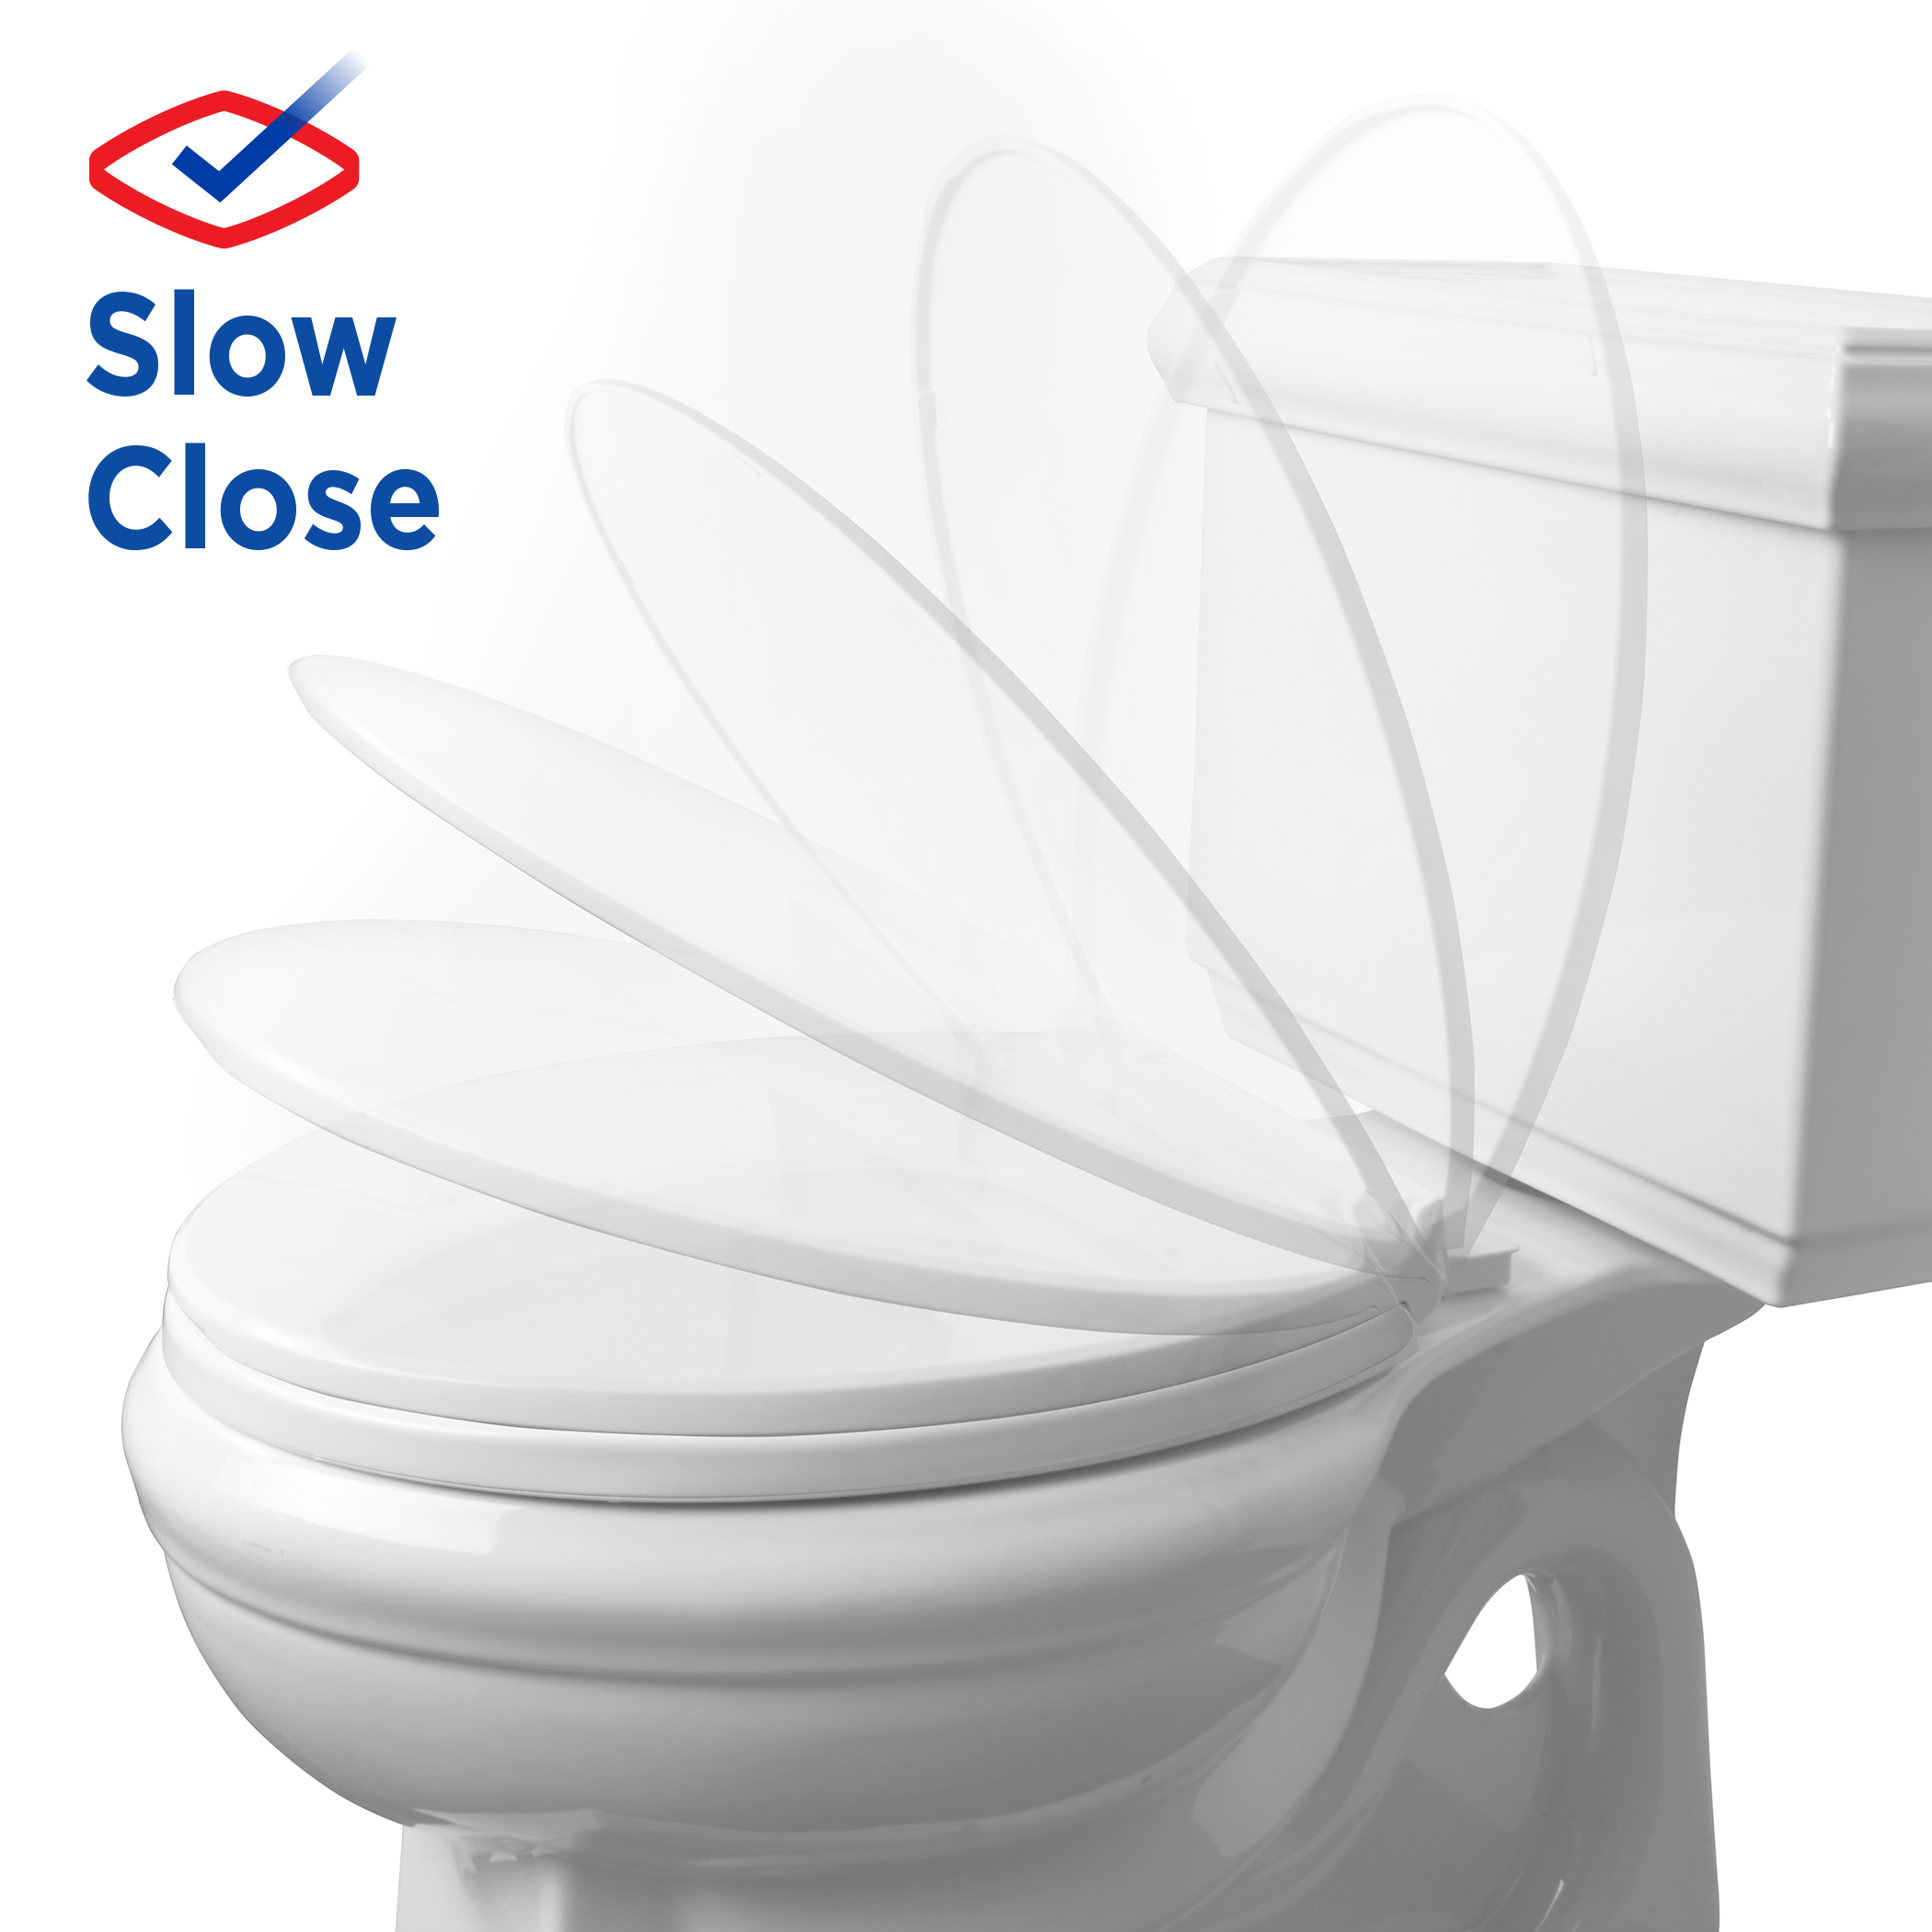 Clorox Antimicrobial Round Stay Fresh Scented Plastic Toilet Seat with Easy-off Hinges - image 5 of 11